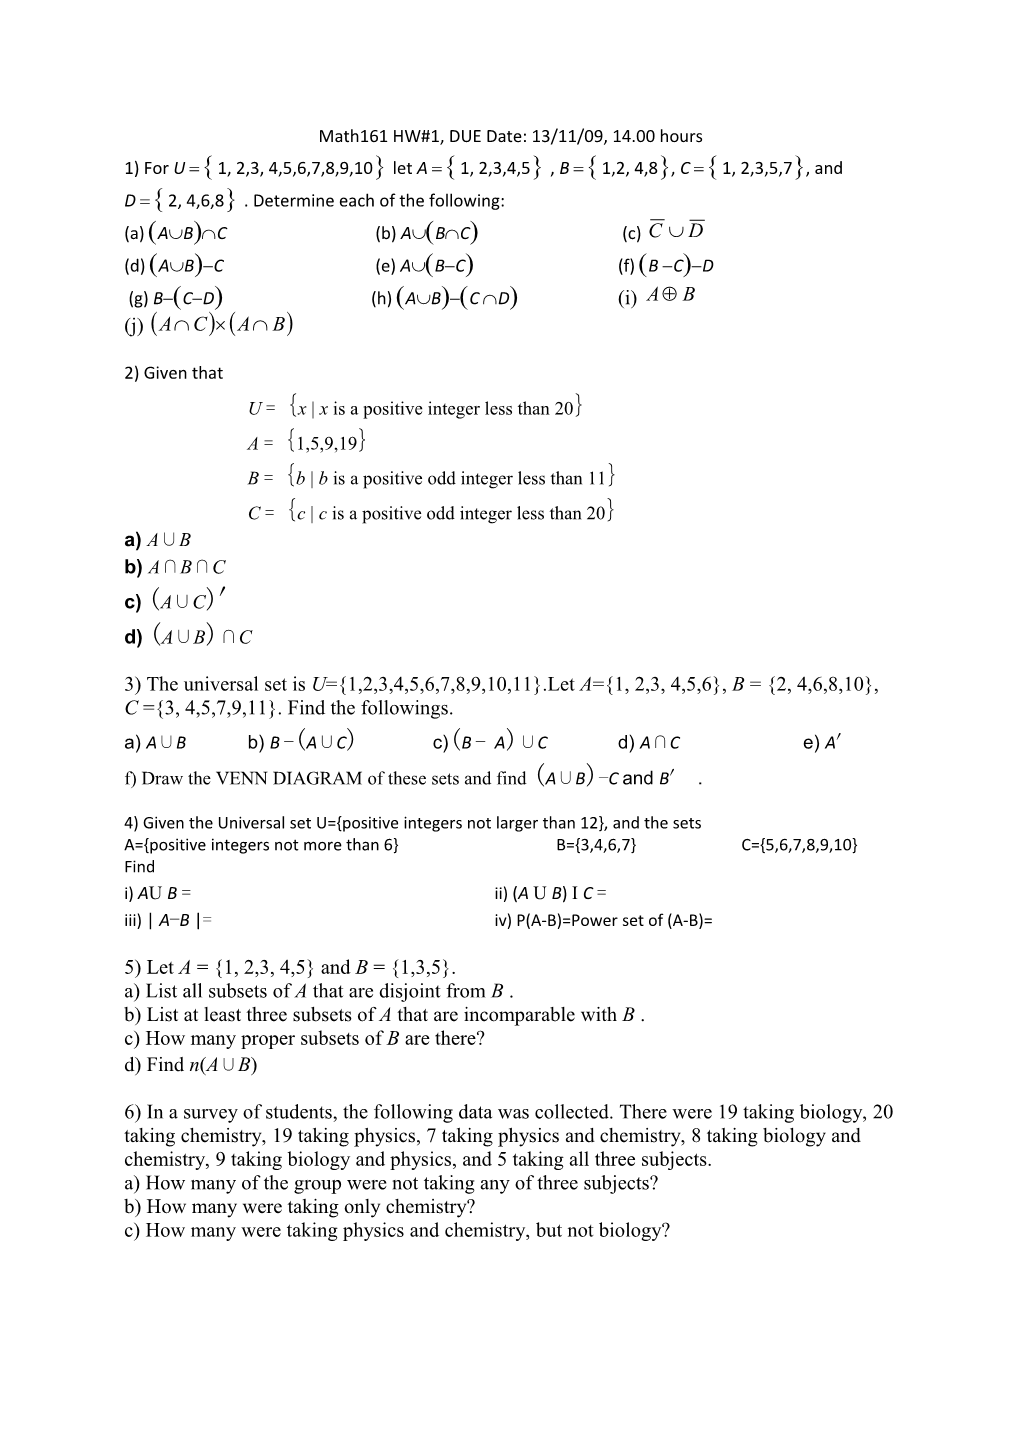 Math161 HW#1, DUE Date: 13/11/09, 14.00 Hours